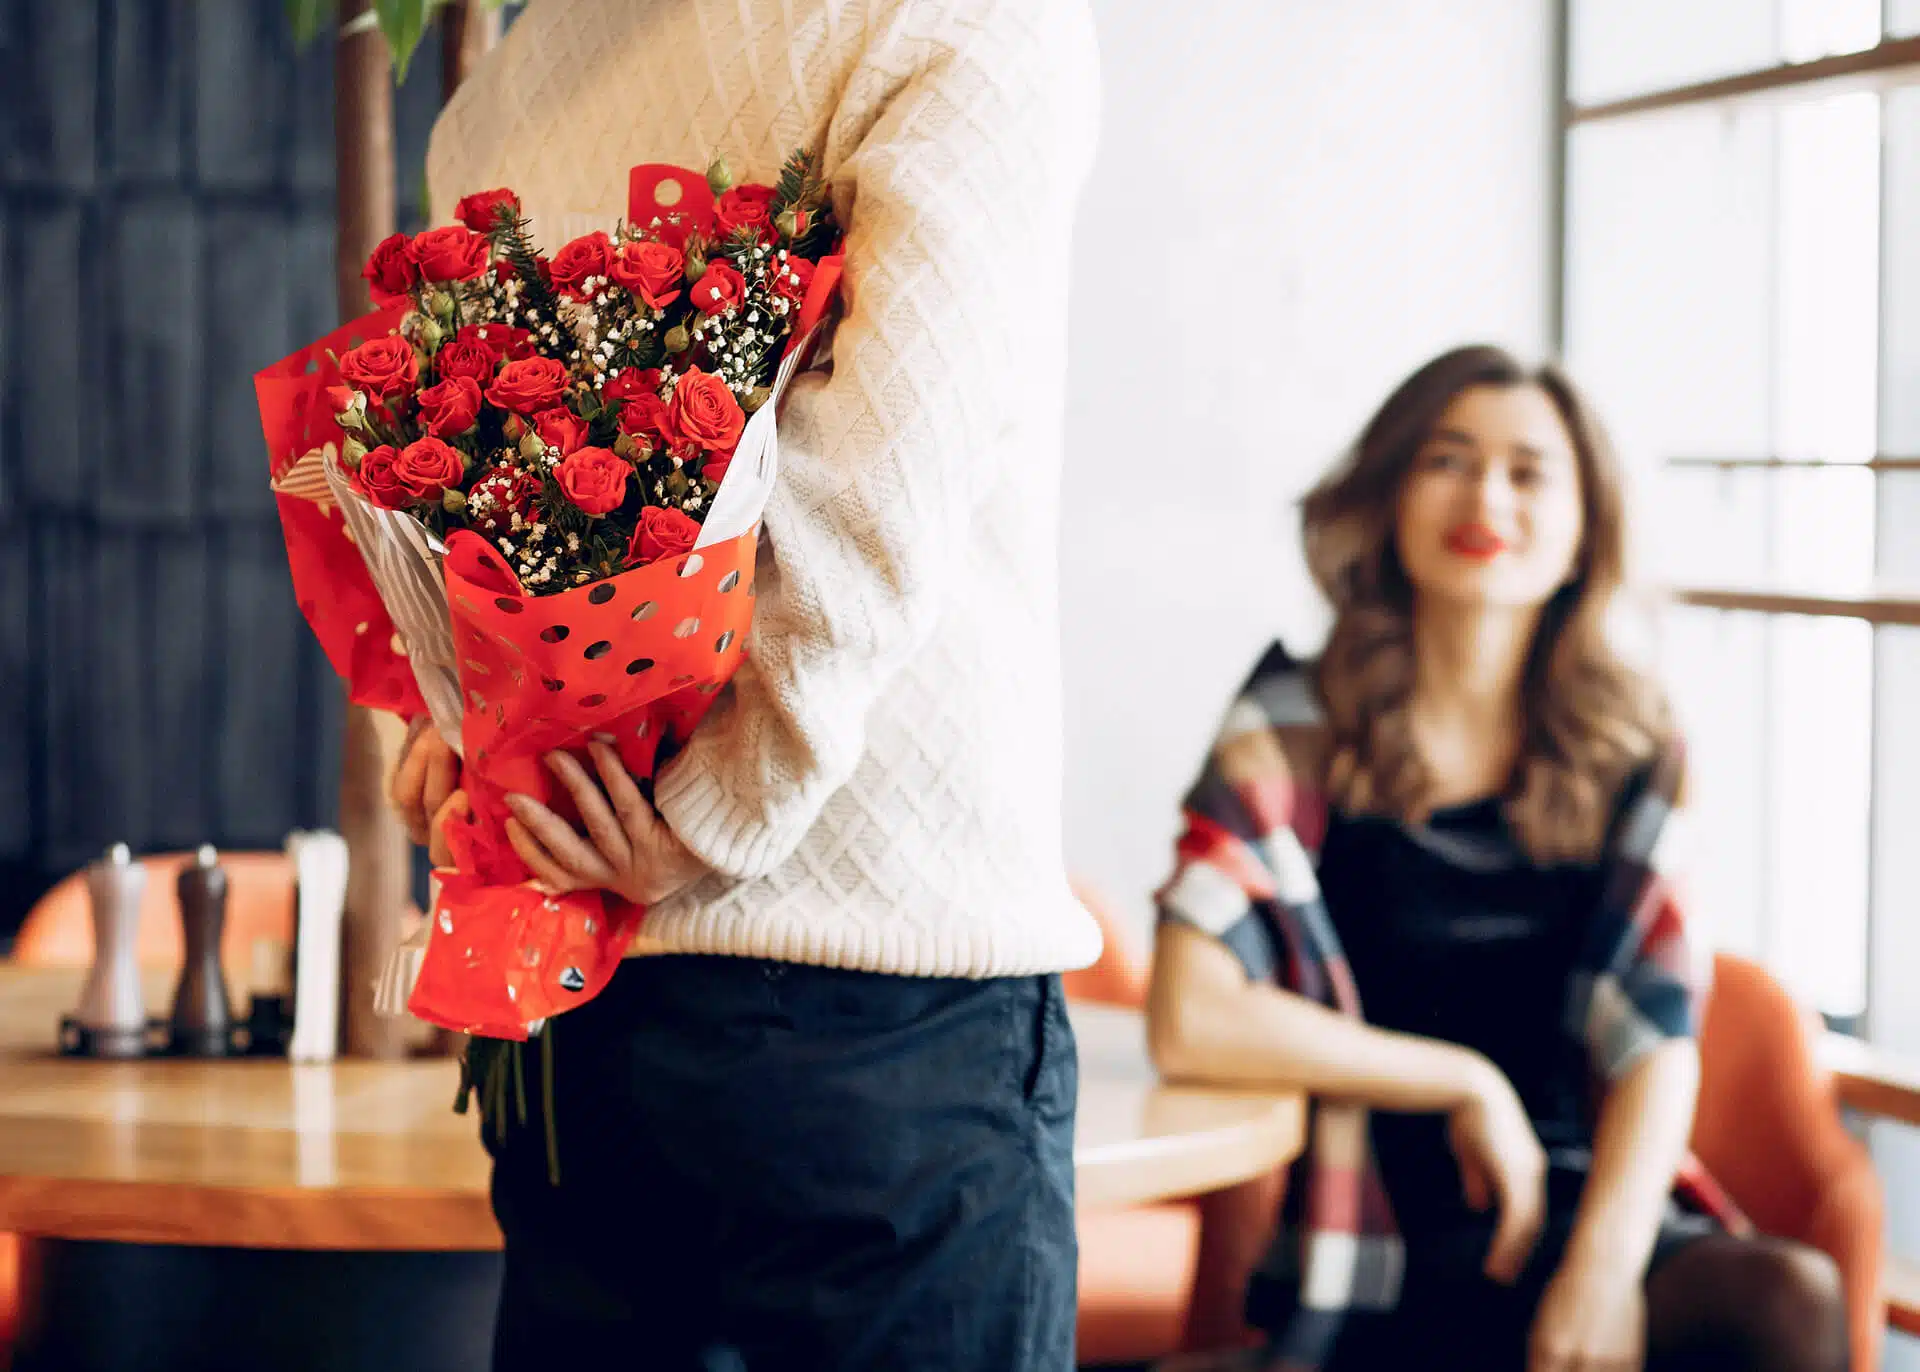 man bringing flowers to a woman on a date